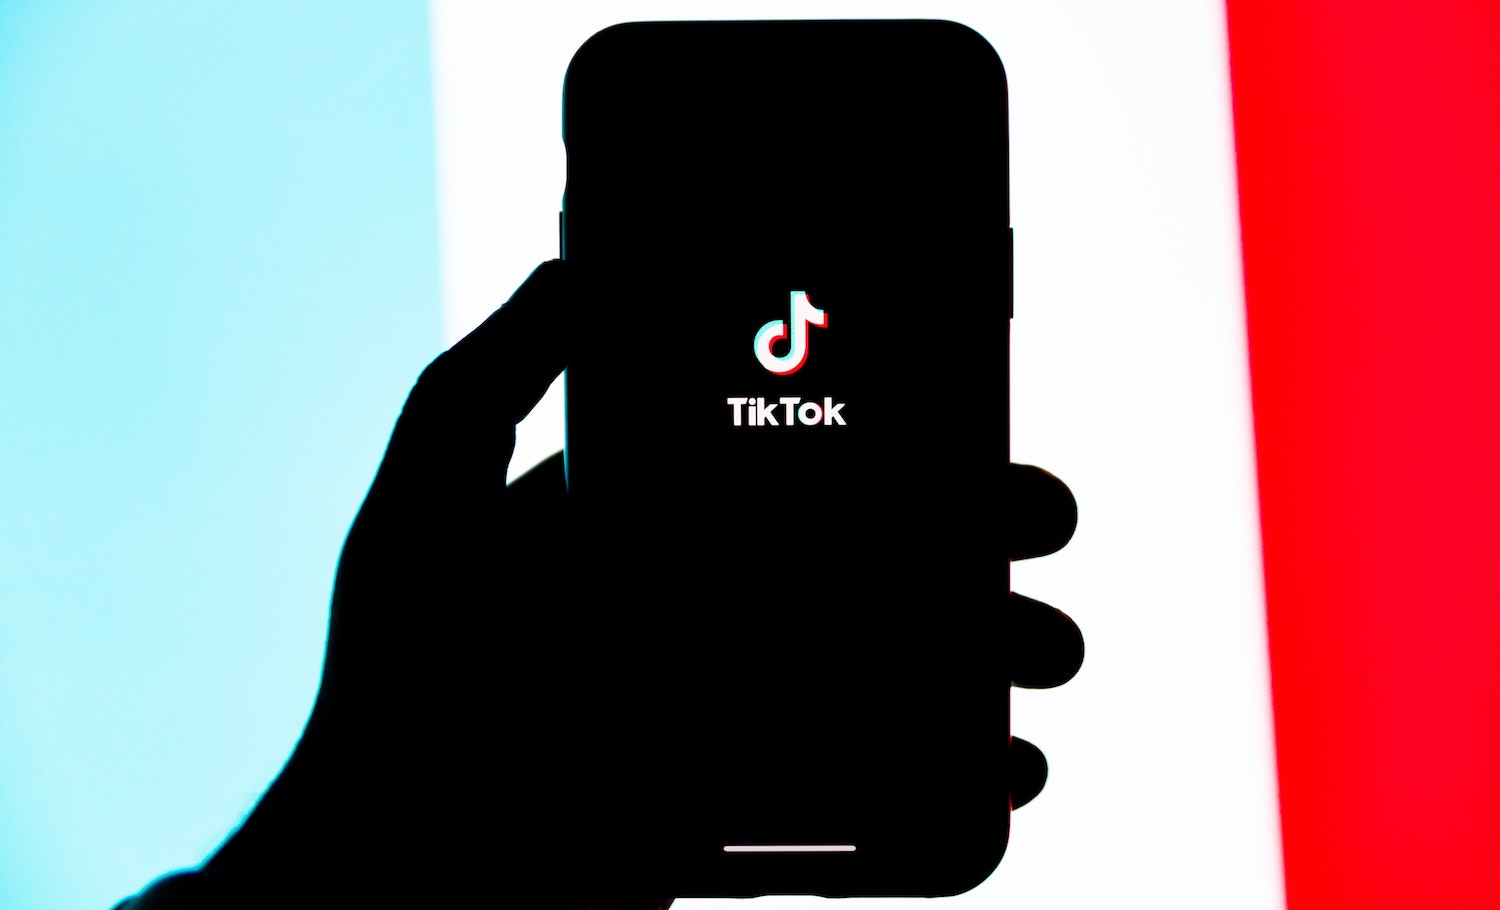 What TikTok’s distro deal with UnitedMasters means for artists